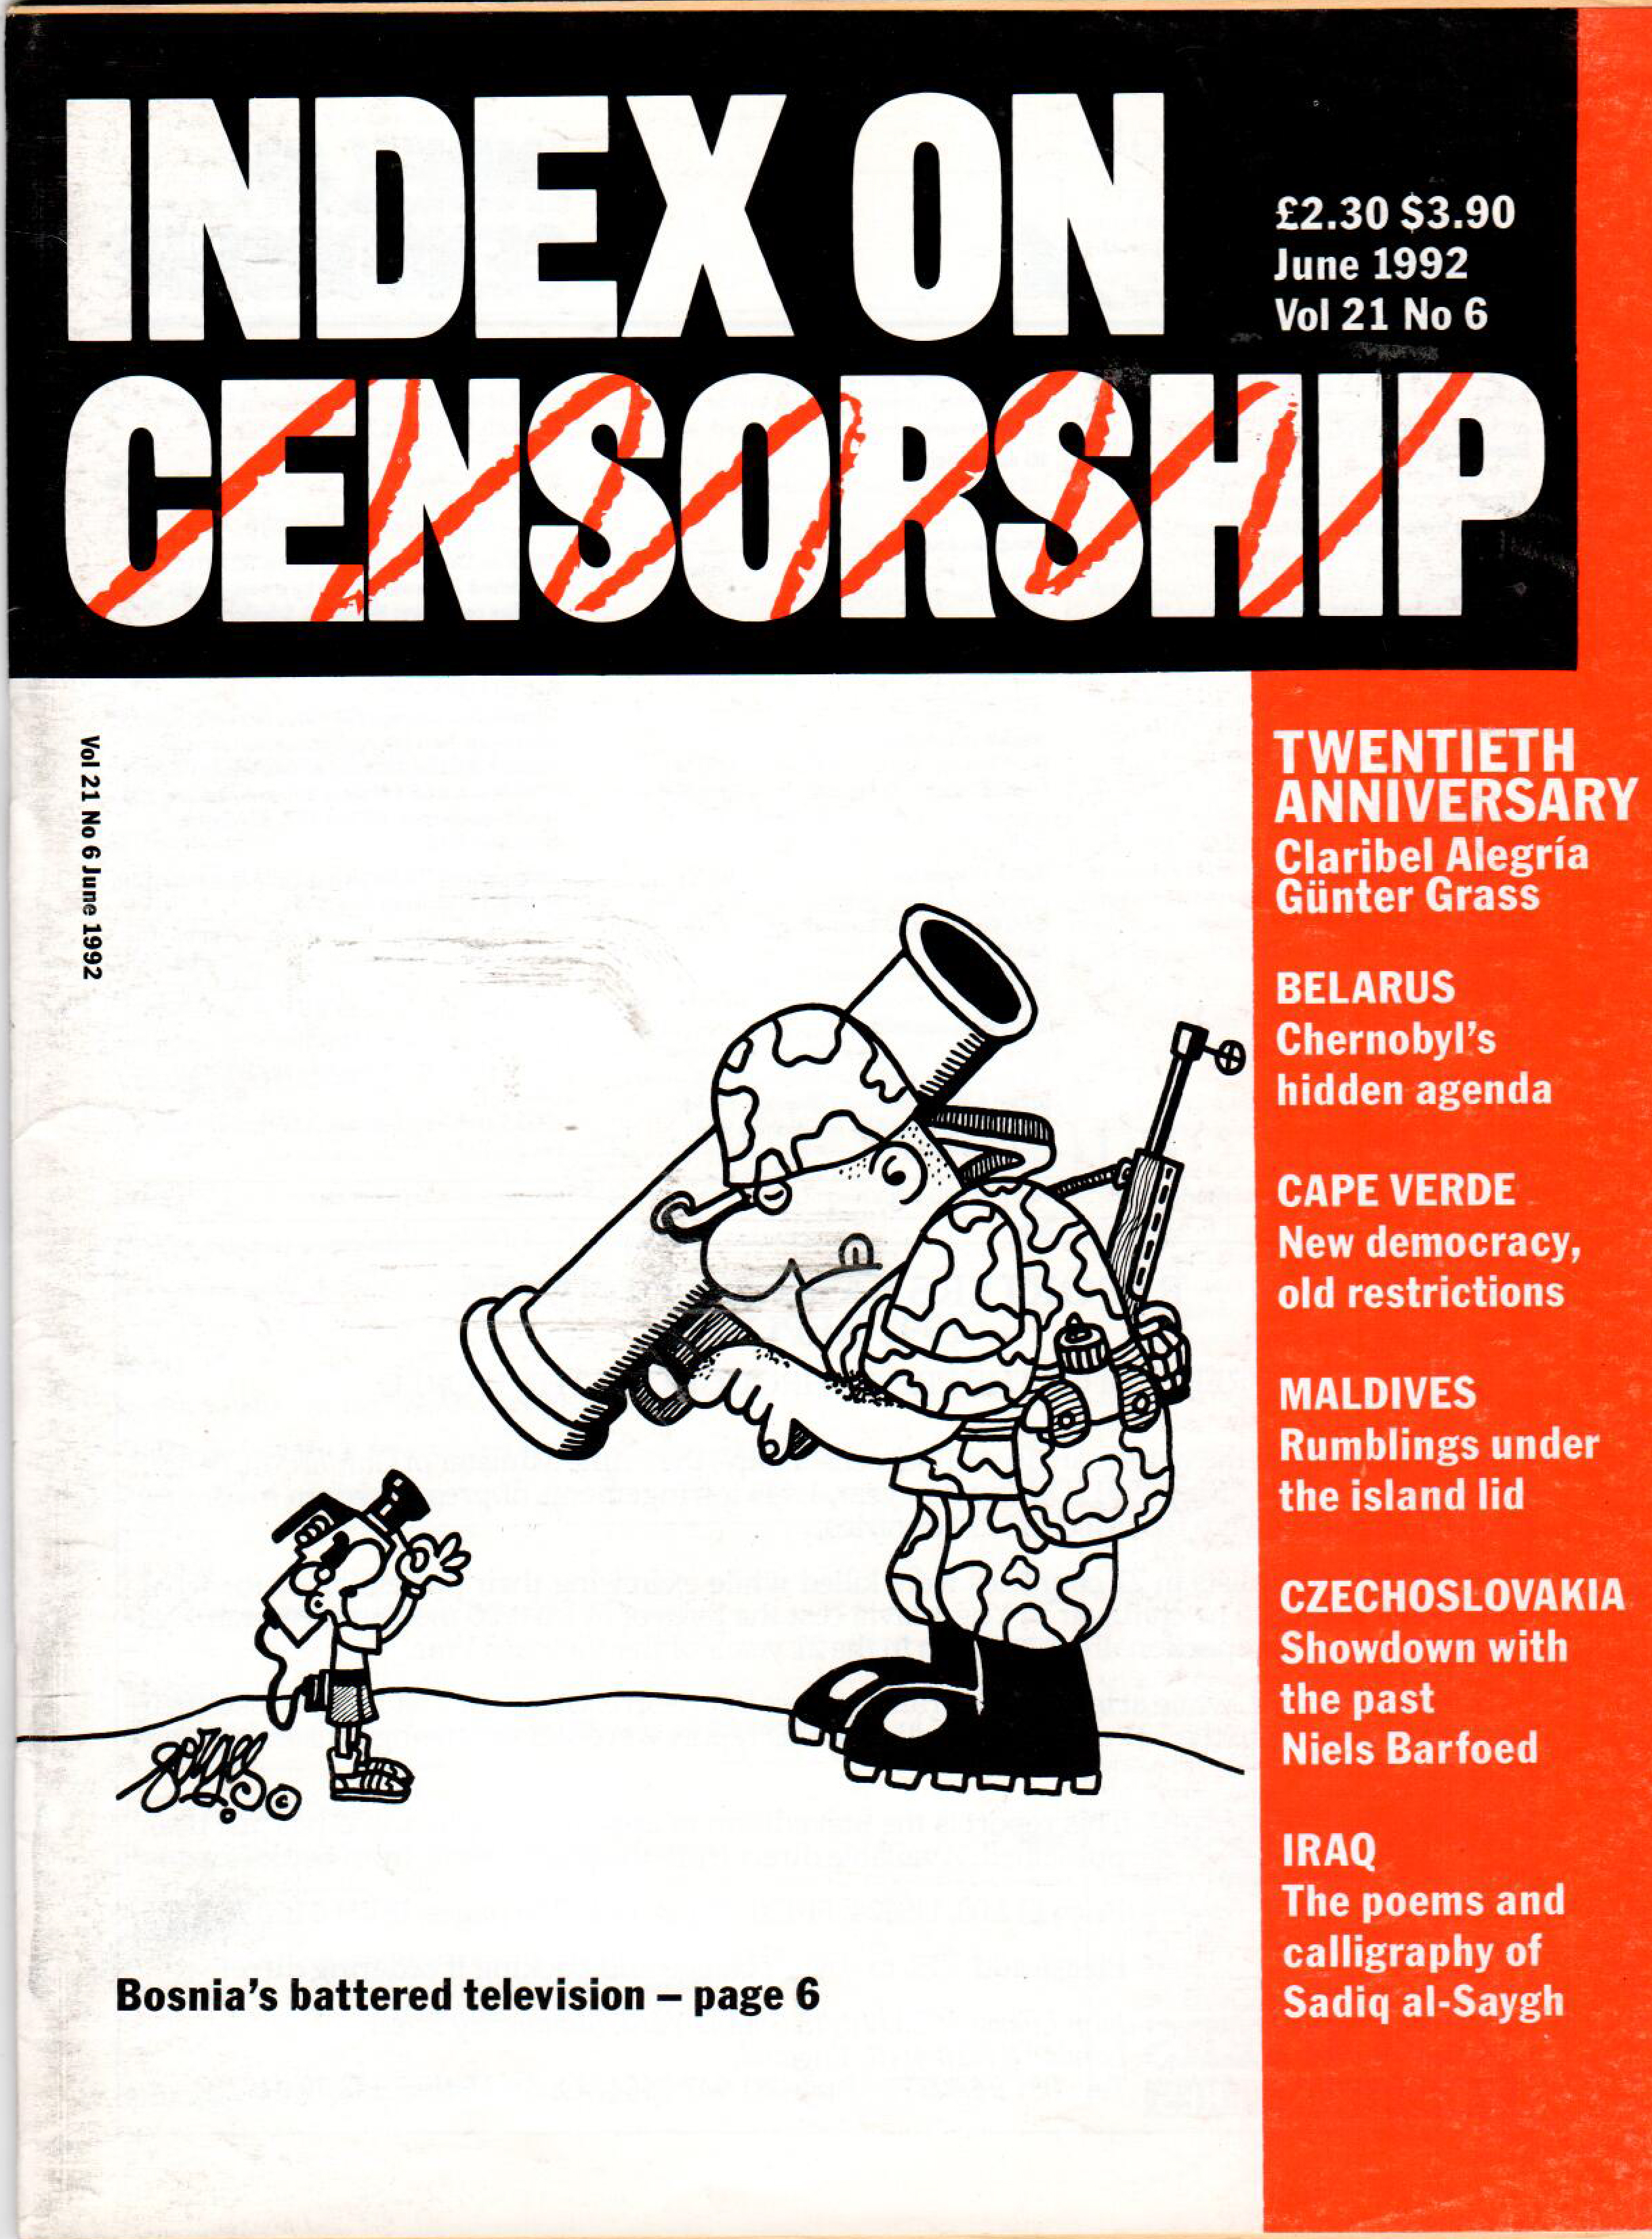 20th Anniversary: Reign of terror, the June 1992 issue of the Index on Censorship magazine.